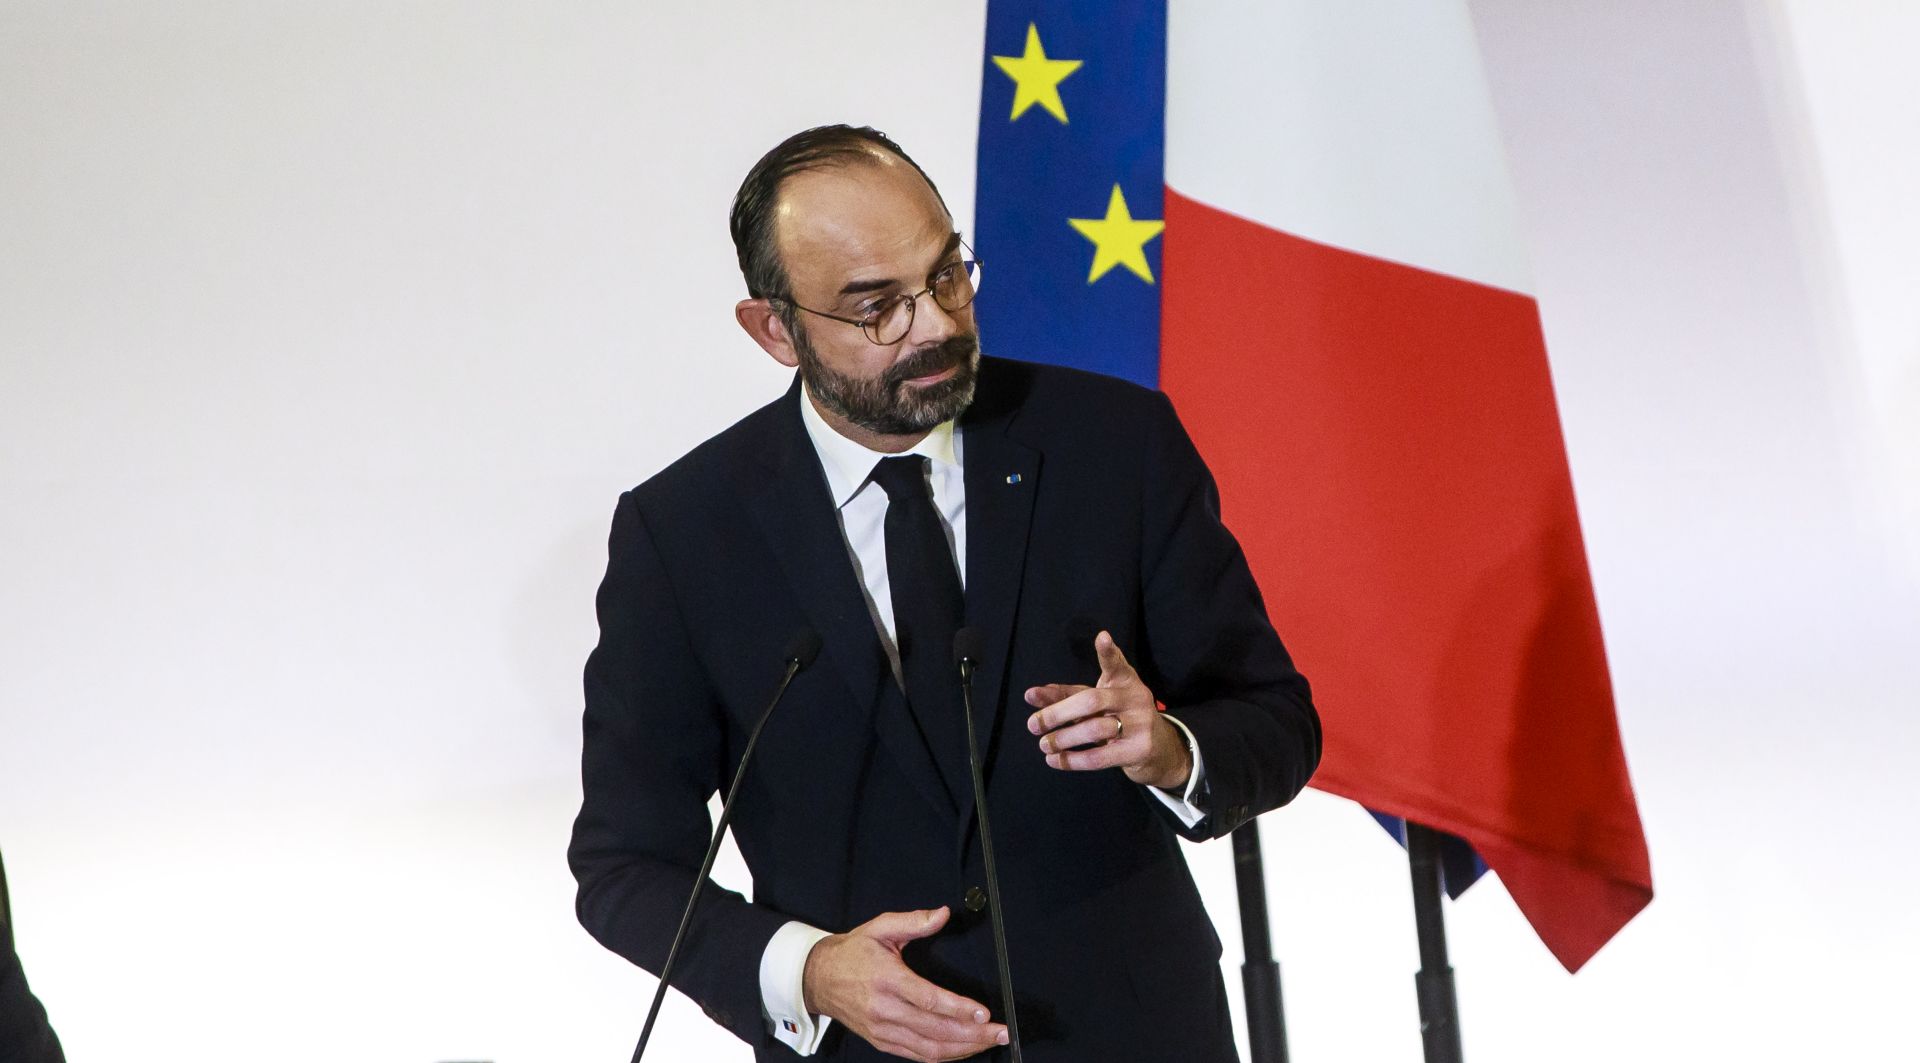 epa08063121 French Prime Minister Edouard Philippe delivers his speech to unveil the details of a pension reform plan before the CESE (Economic, Social and Environmental Council) in Paris, France, 11 December 2019. Unions representing railway and transport workers and many others in the public sector have called for a 6th day of general strike and demonstration to protest against French government's reform of the pension system.  EPA/CHRISTOPHE PETIT TESSON